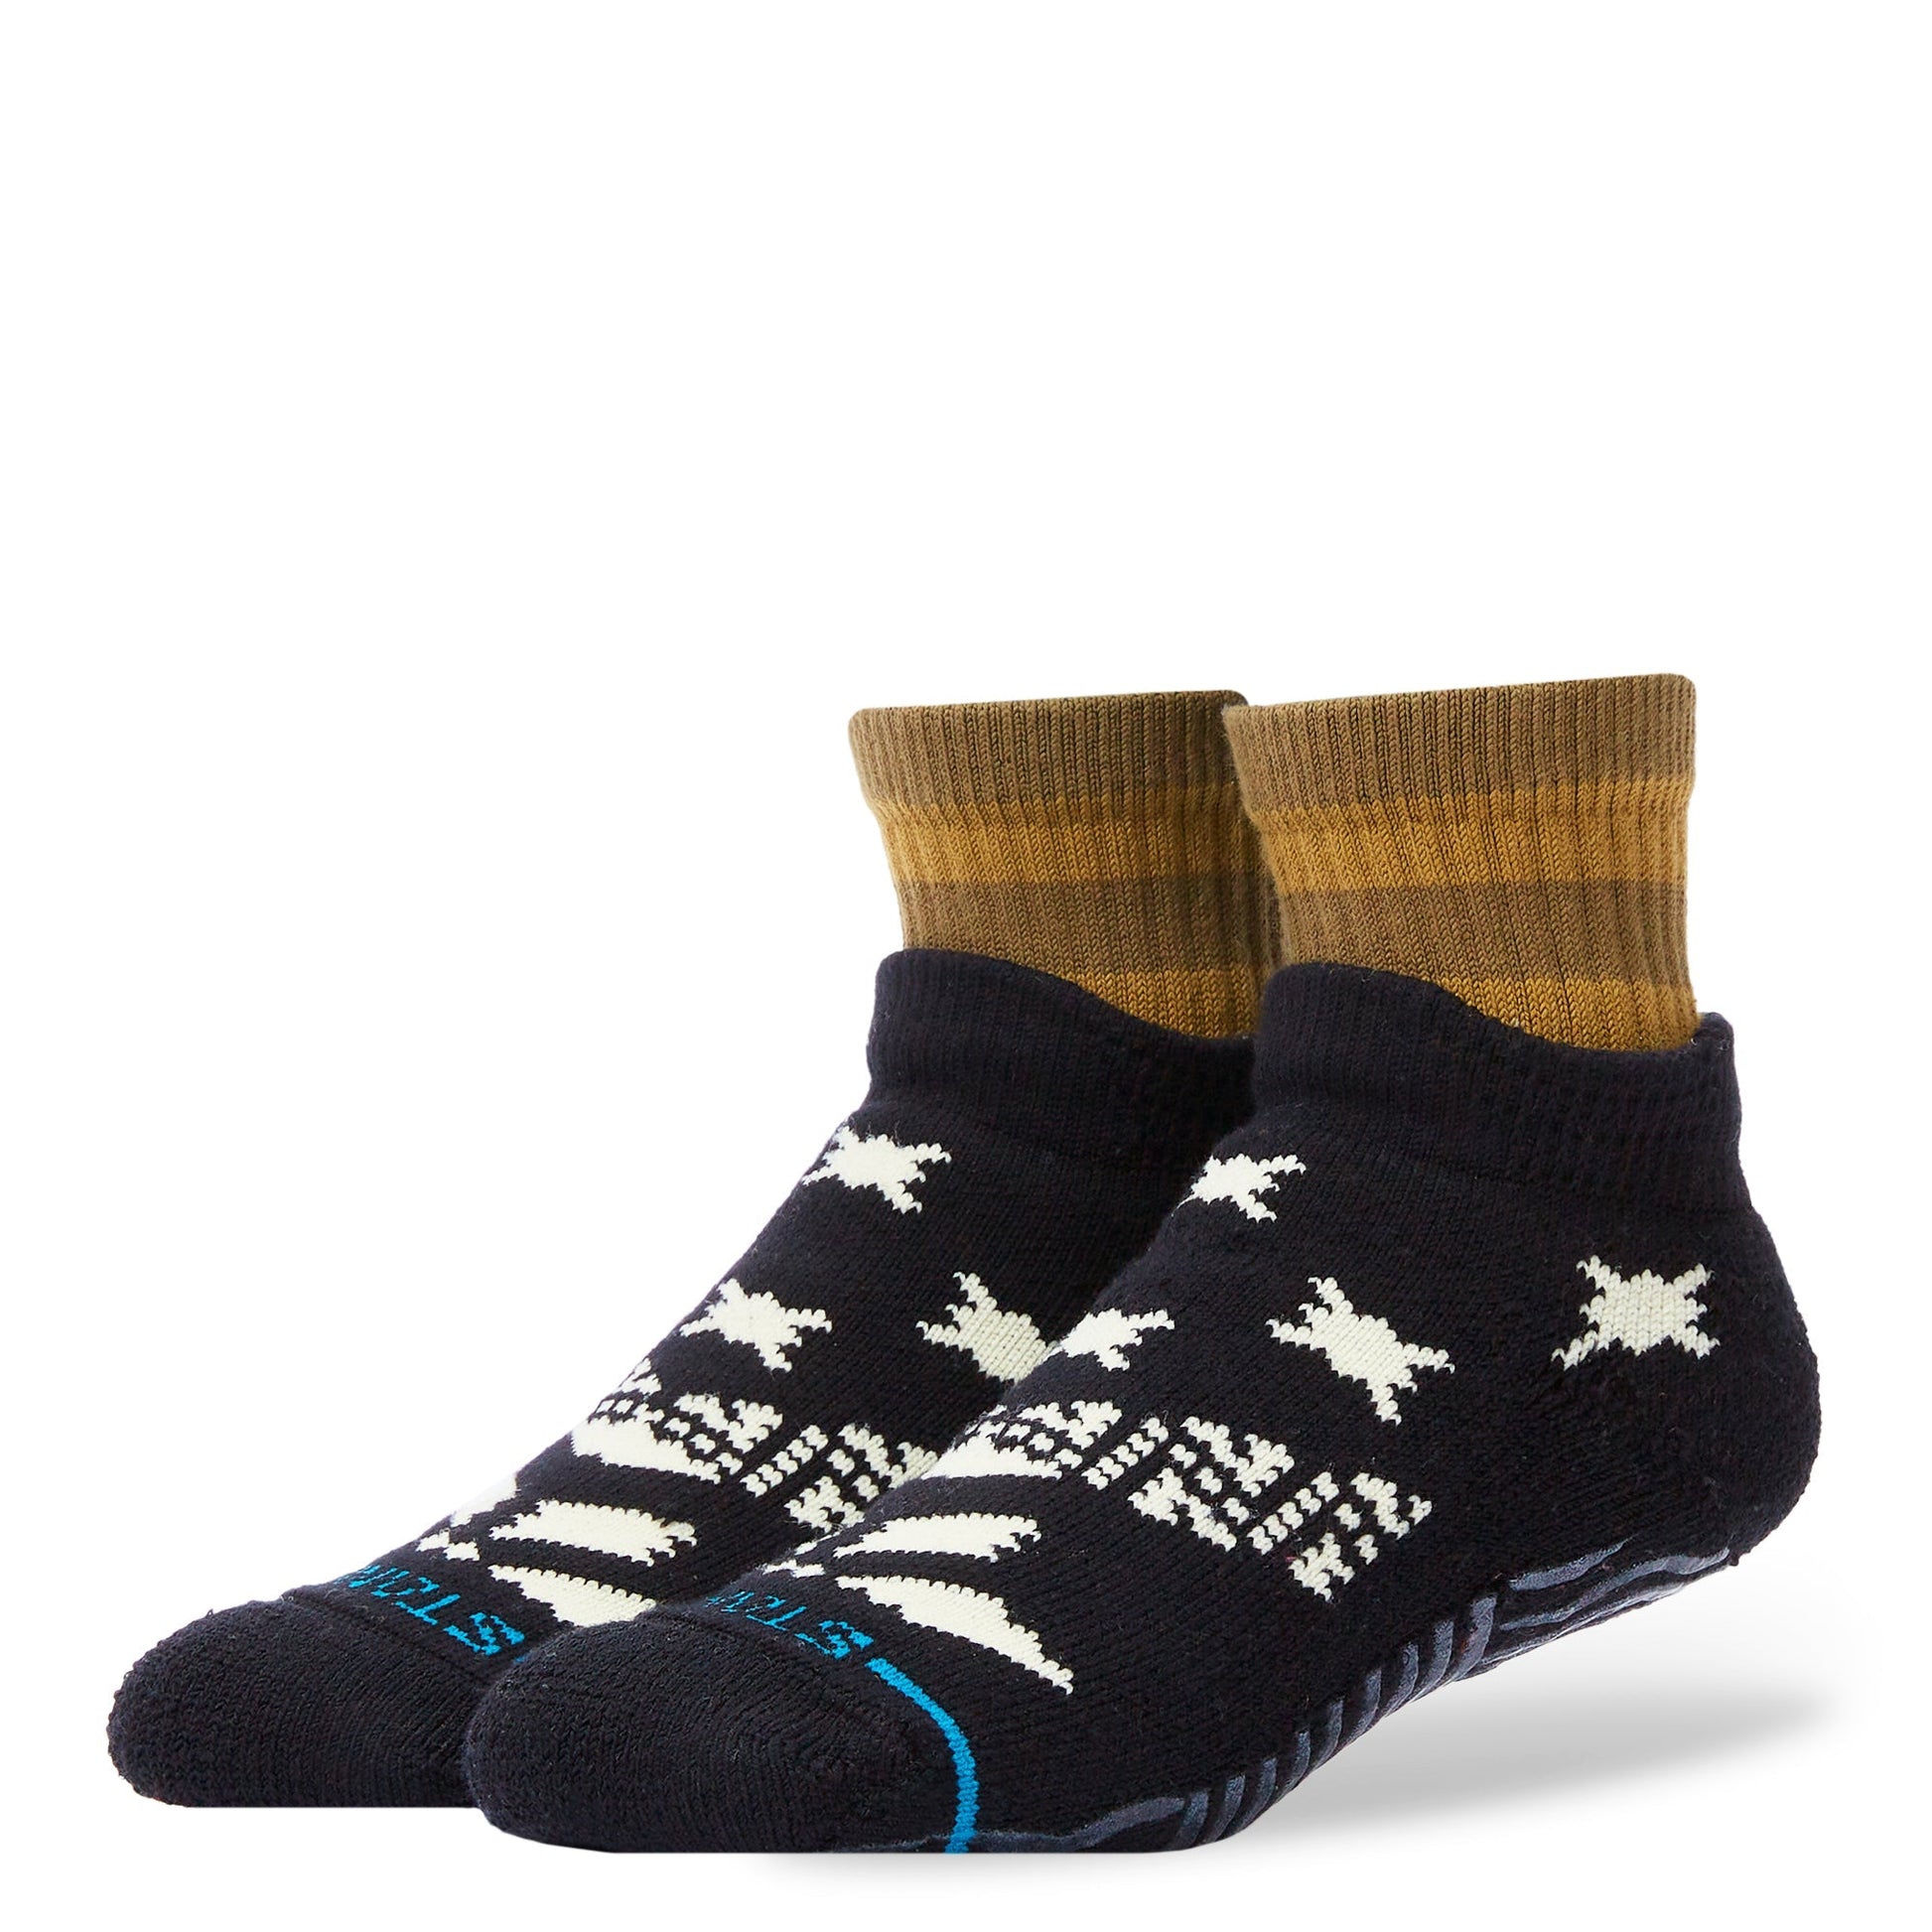 Chaussons chaussettes noirs Holladays de Stance – Stance Europe